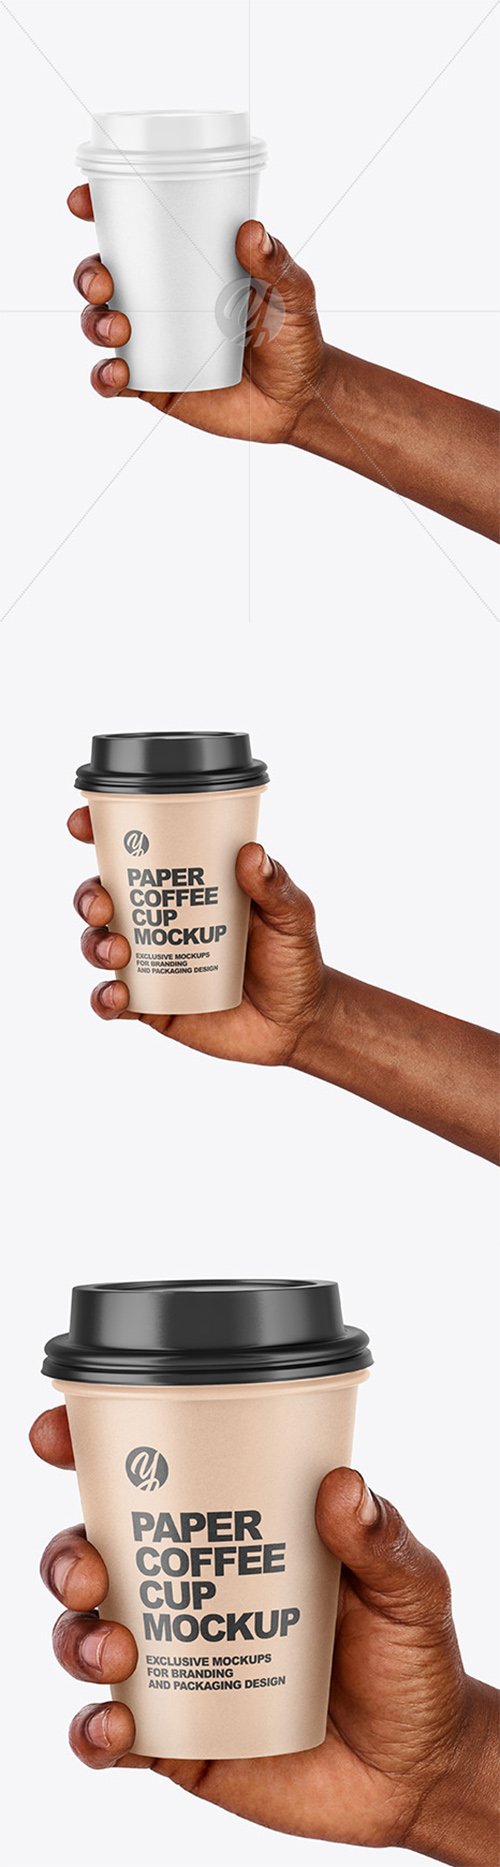 Hand Holding a Coffee Cup Mockup 63309